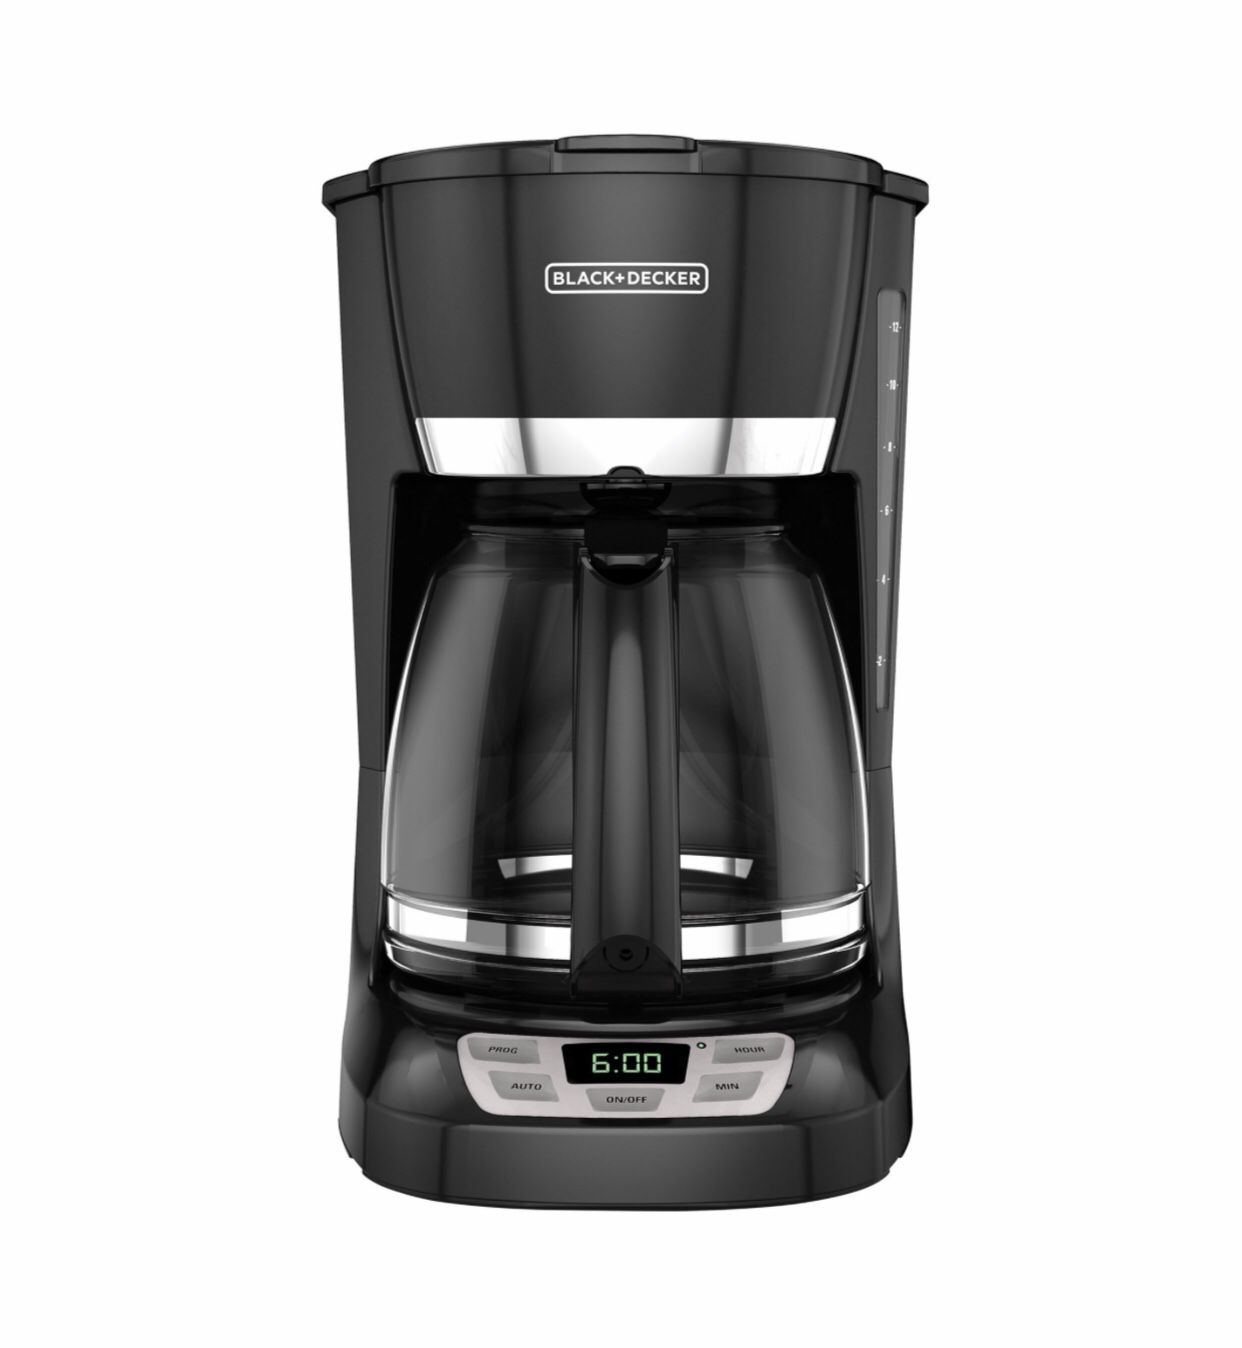 EVERYTHING MUST GO! Black and Decker small coffee maker